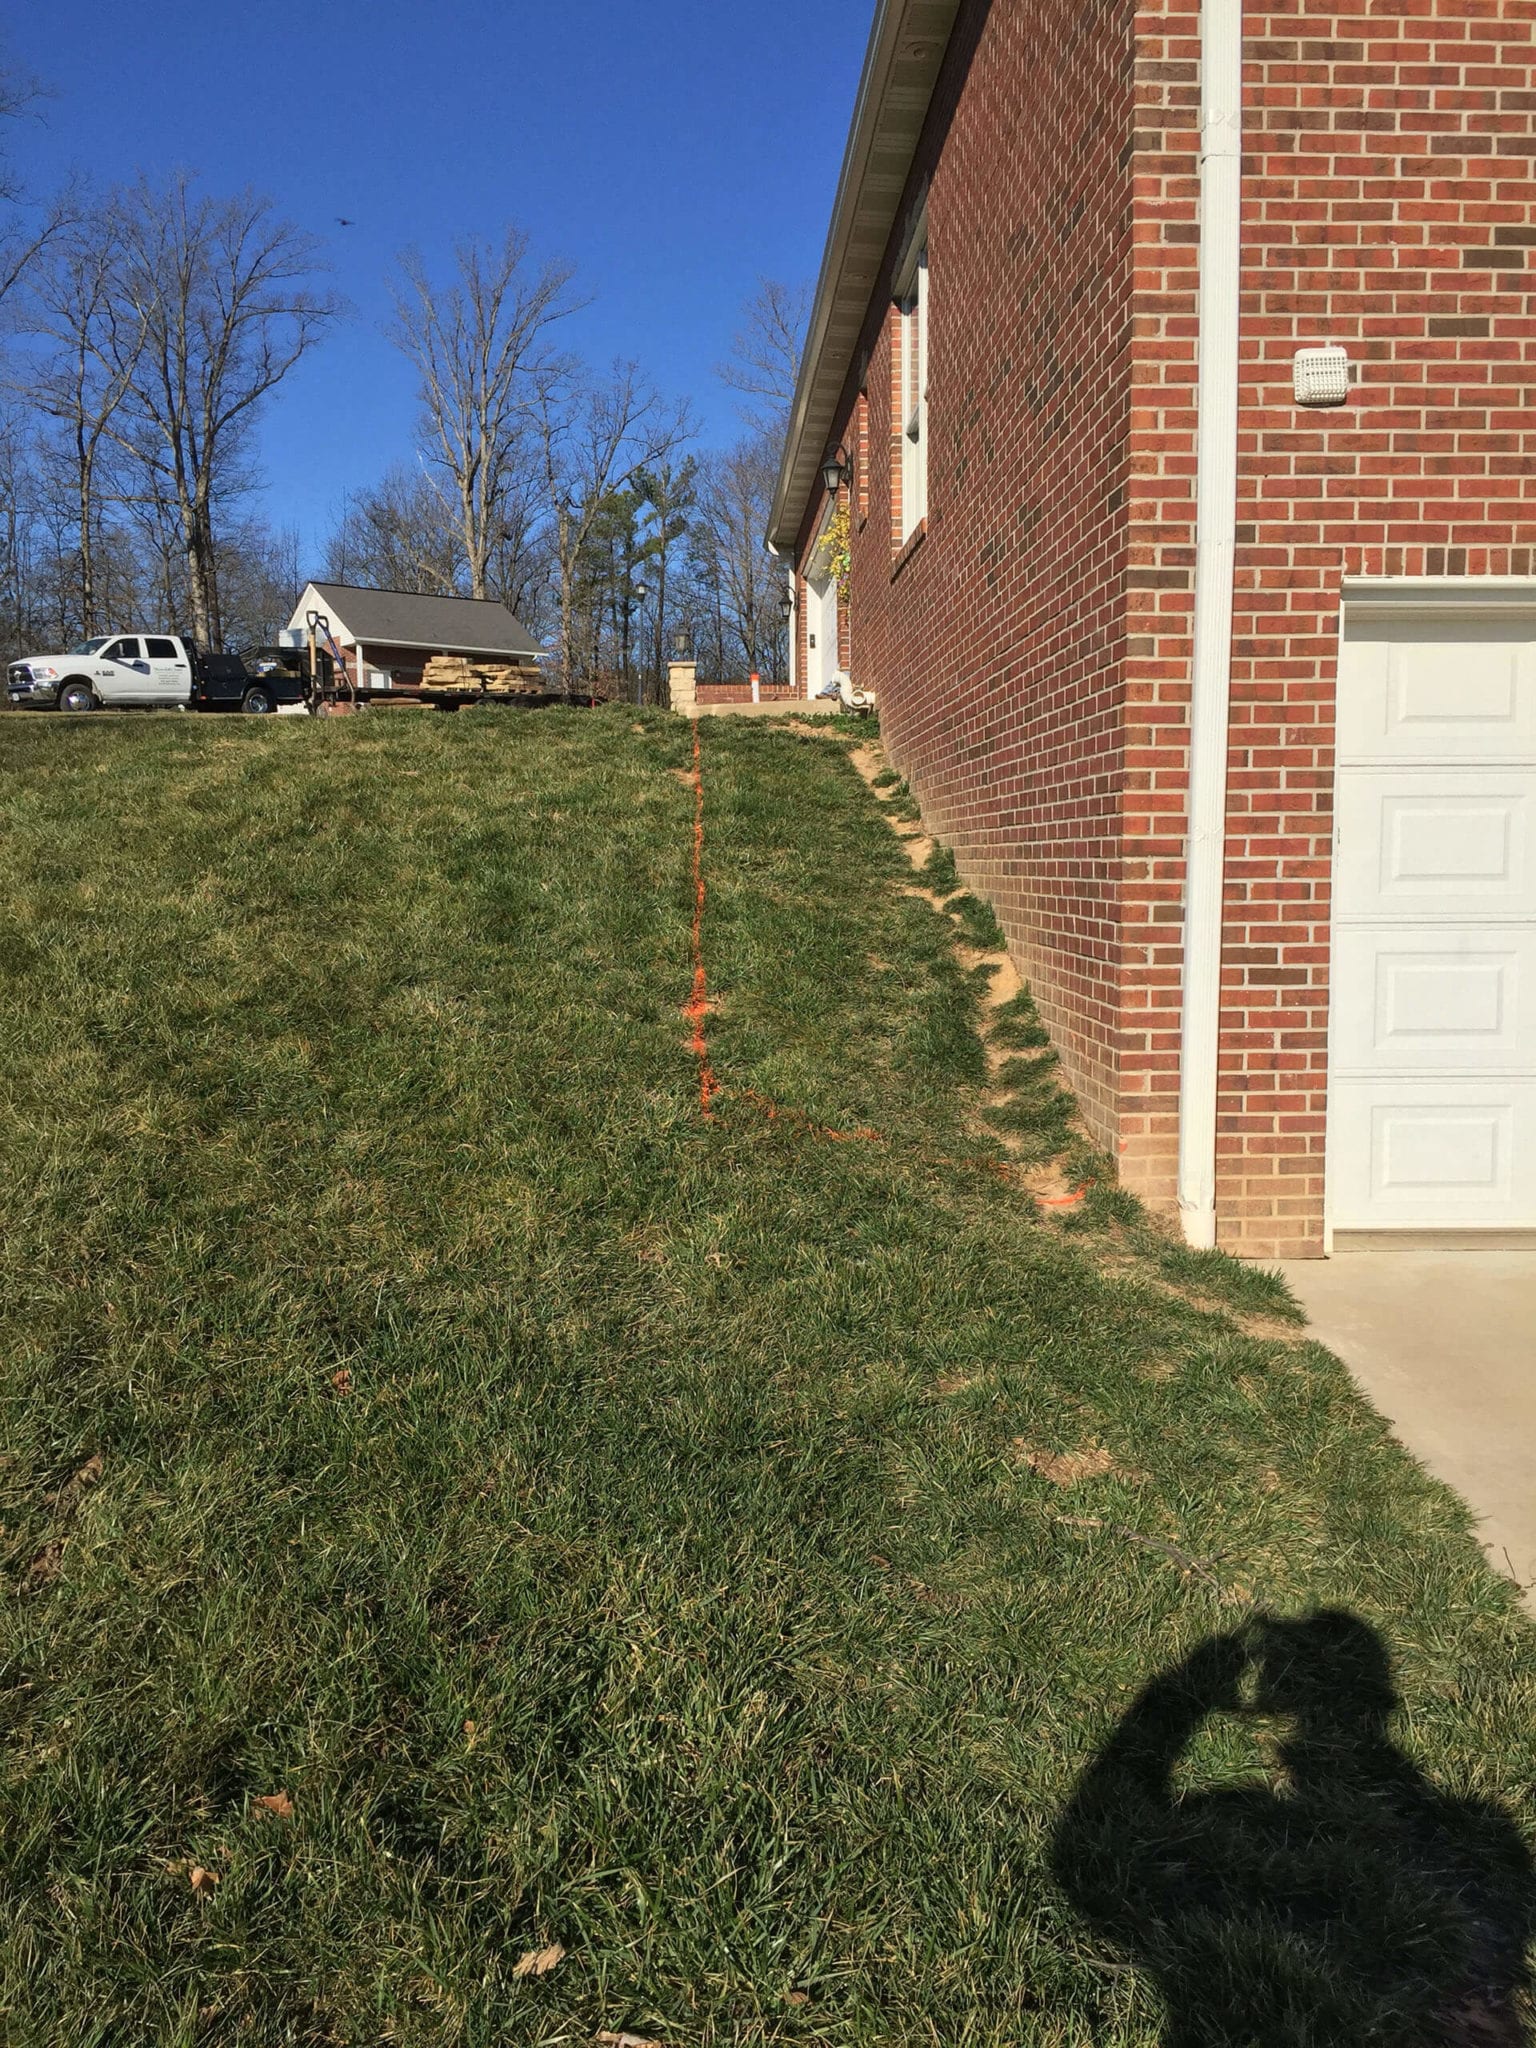 dig lines are painted on the ground for landscaping work Cape Girardeau, MO Project